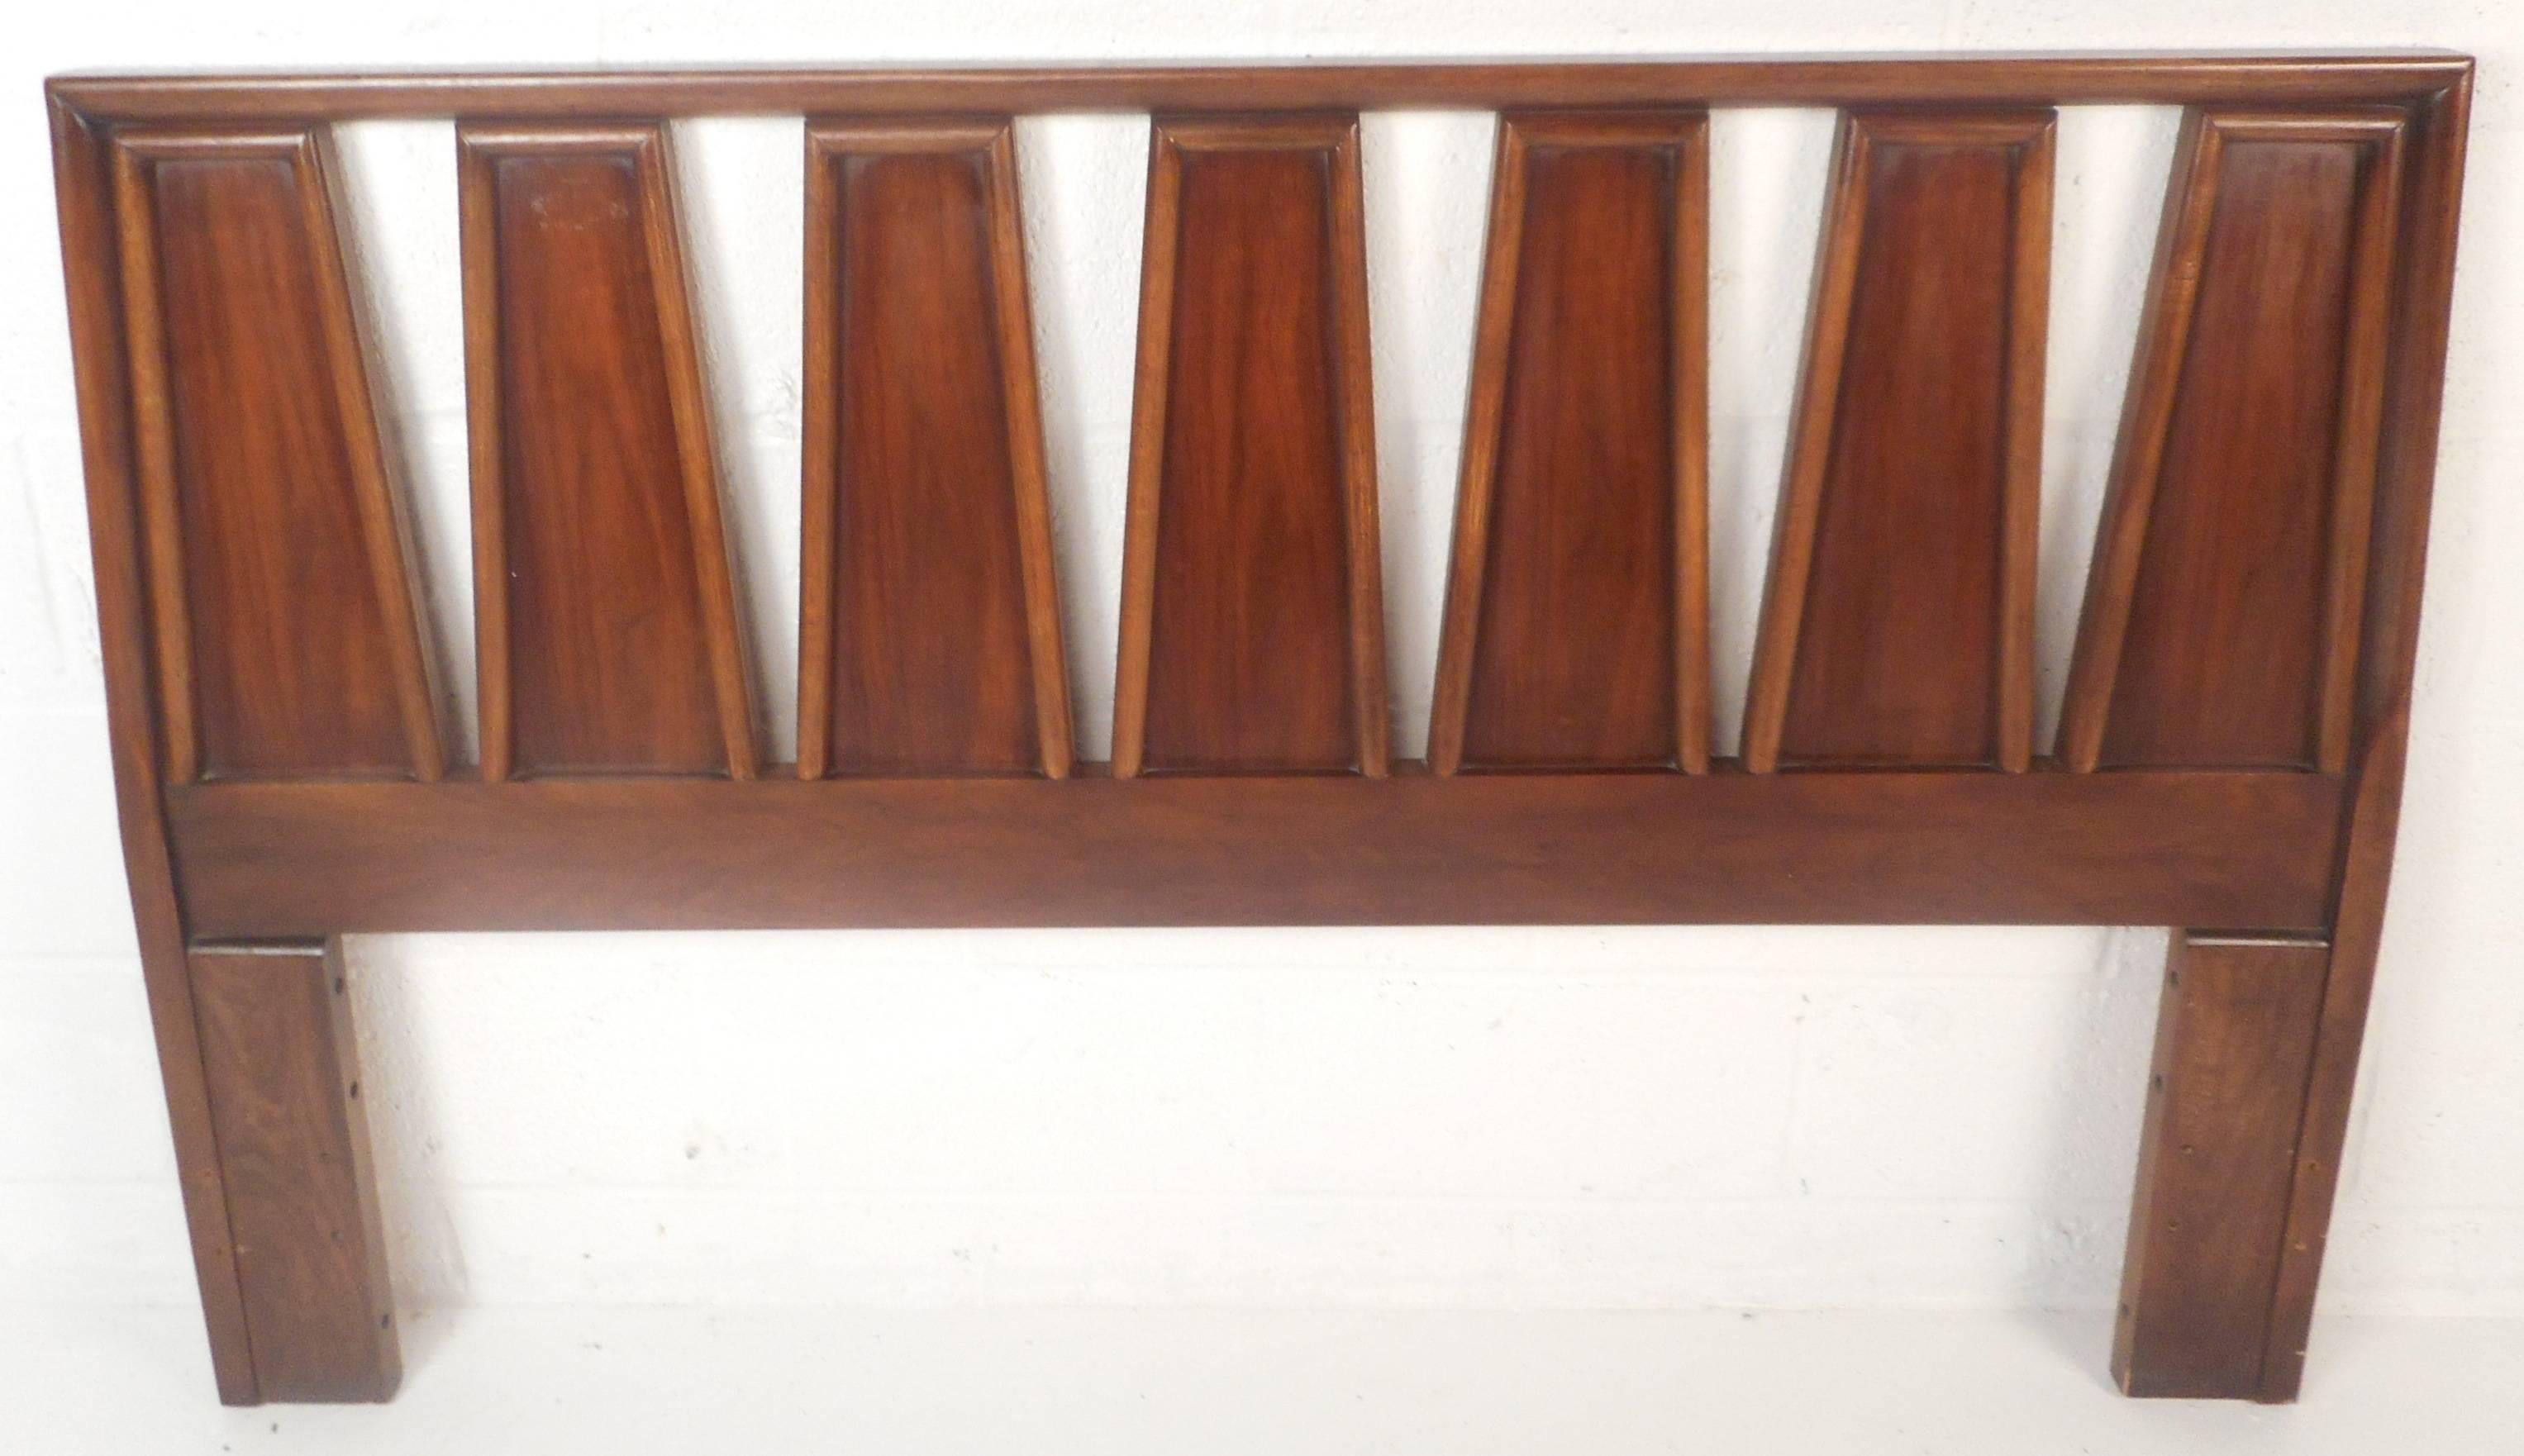 Stunning vintage modern queen-size headboard with unique pattered design and embossed trim. Sleek appearance with beautiful walnut wood grain makes this Mid-Century piece the perfect addition to any modern interior. Please confirm item location (NY